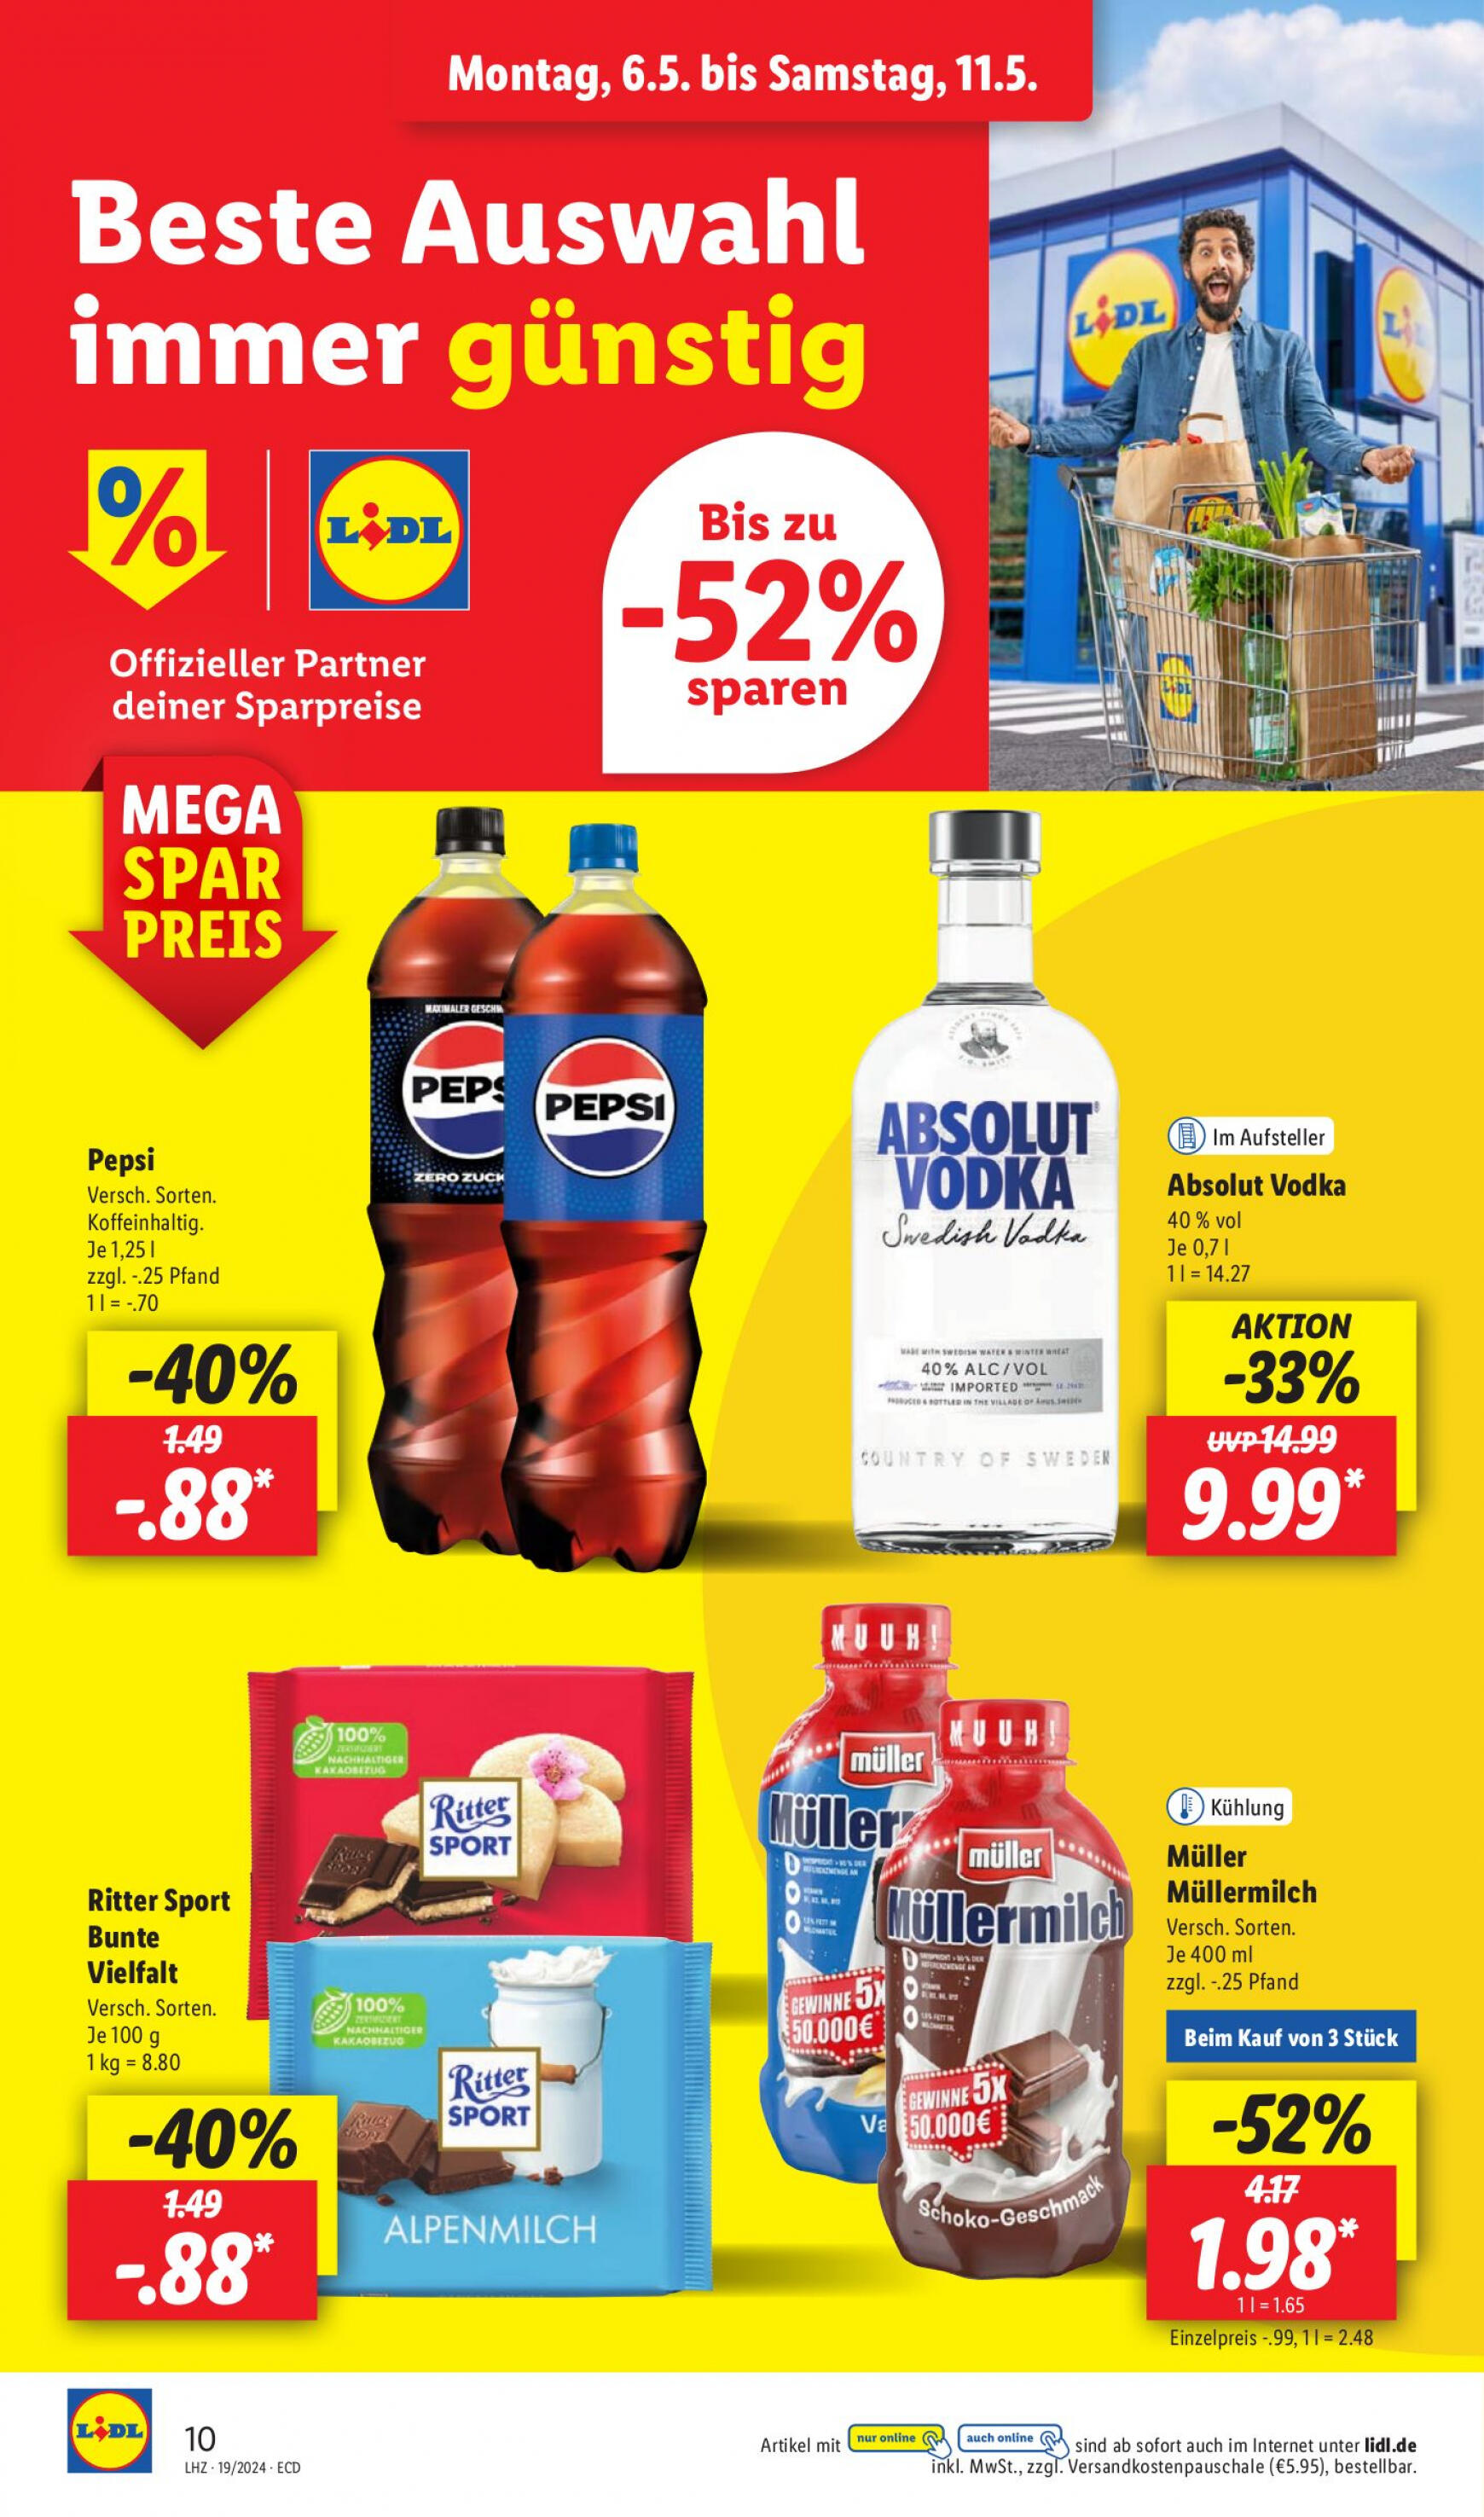 lidl - Flyer Lidl aktuell 06.05. - 11.05. - page: 12